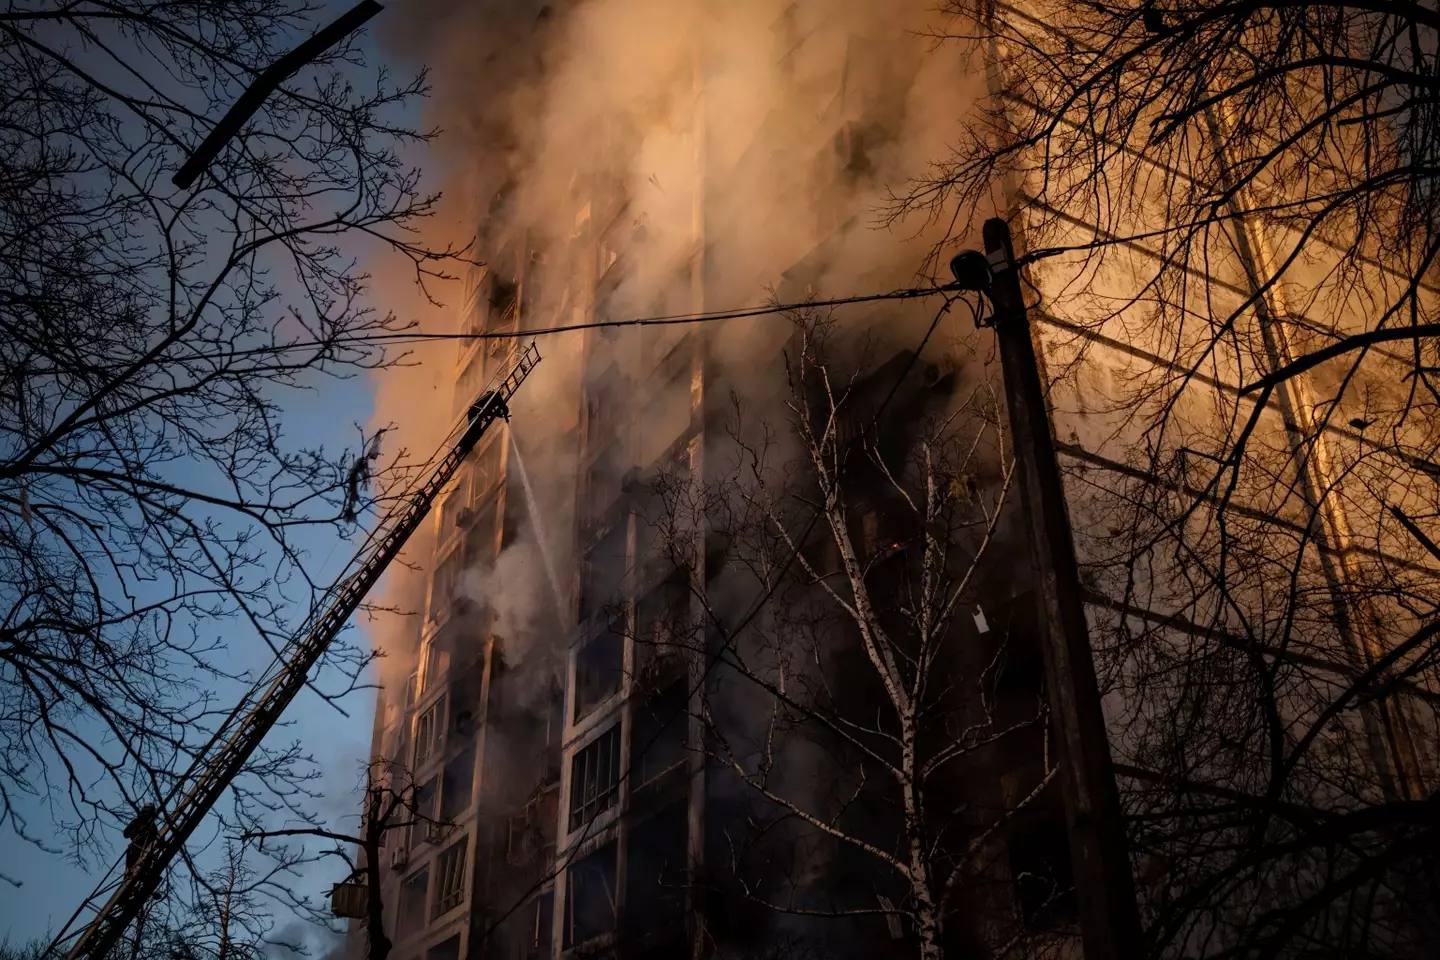 Residential building in Kyiv on fire.